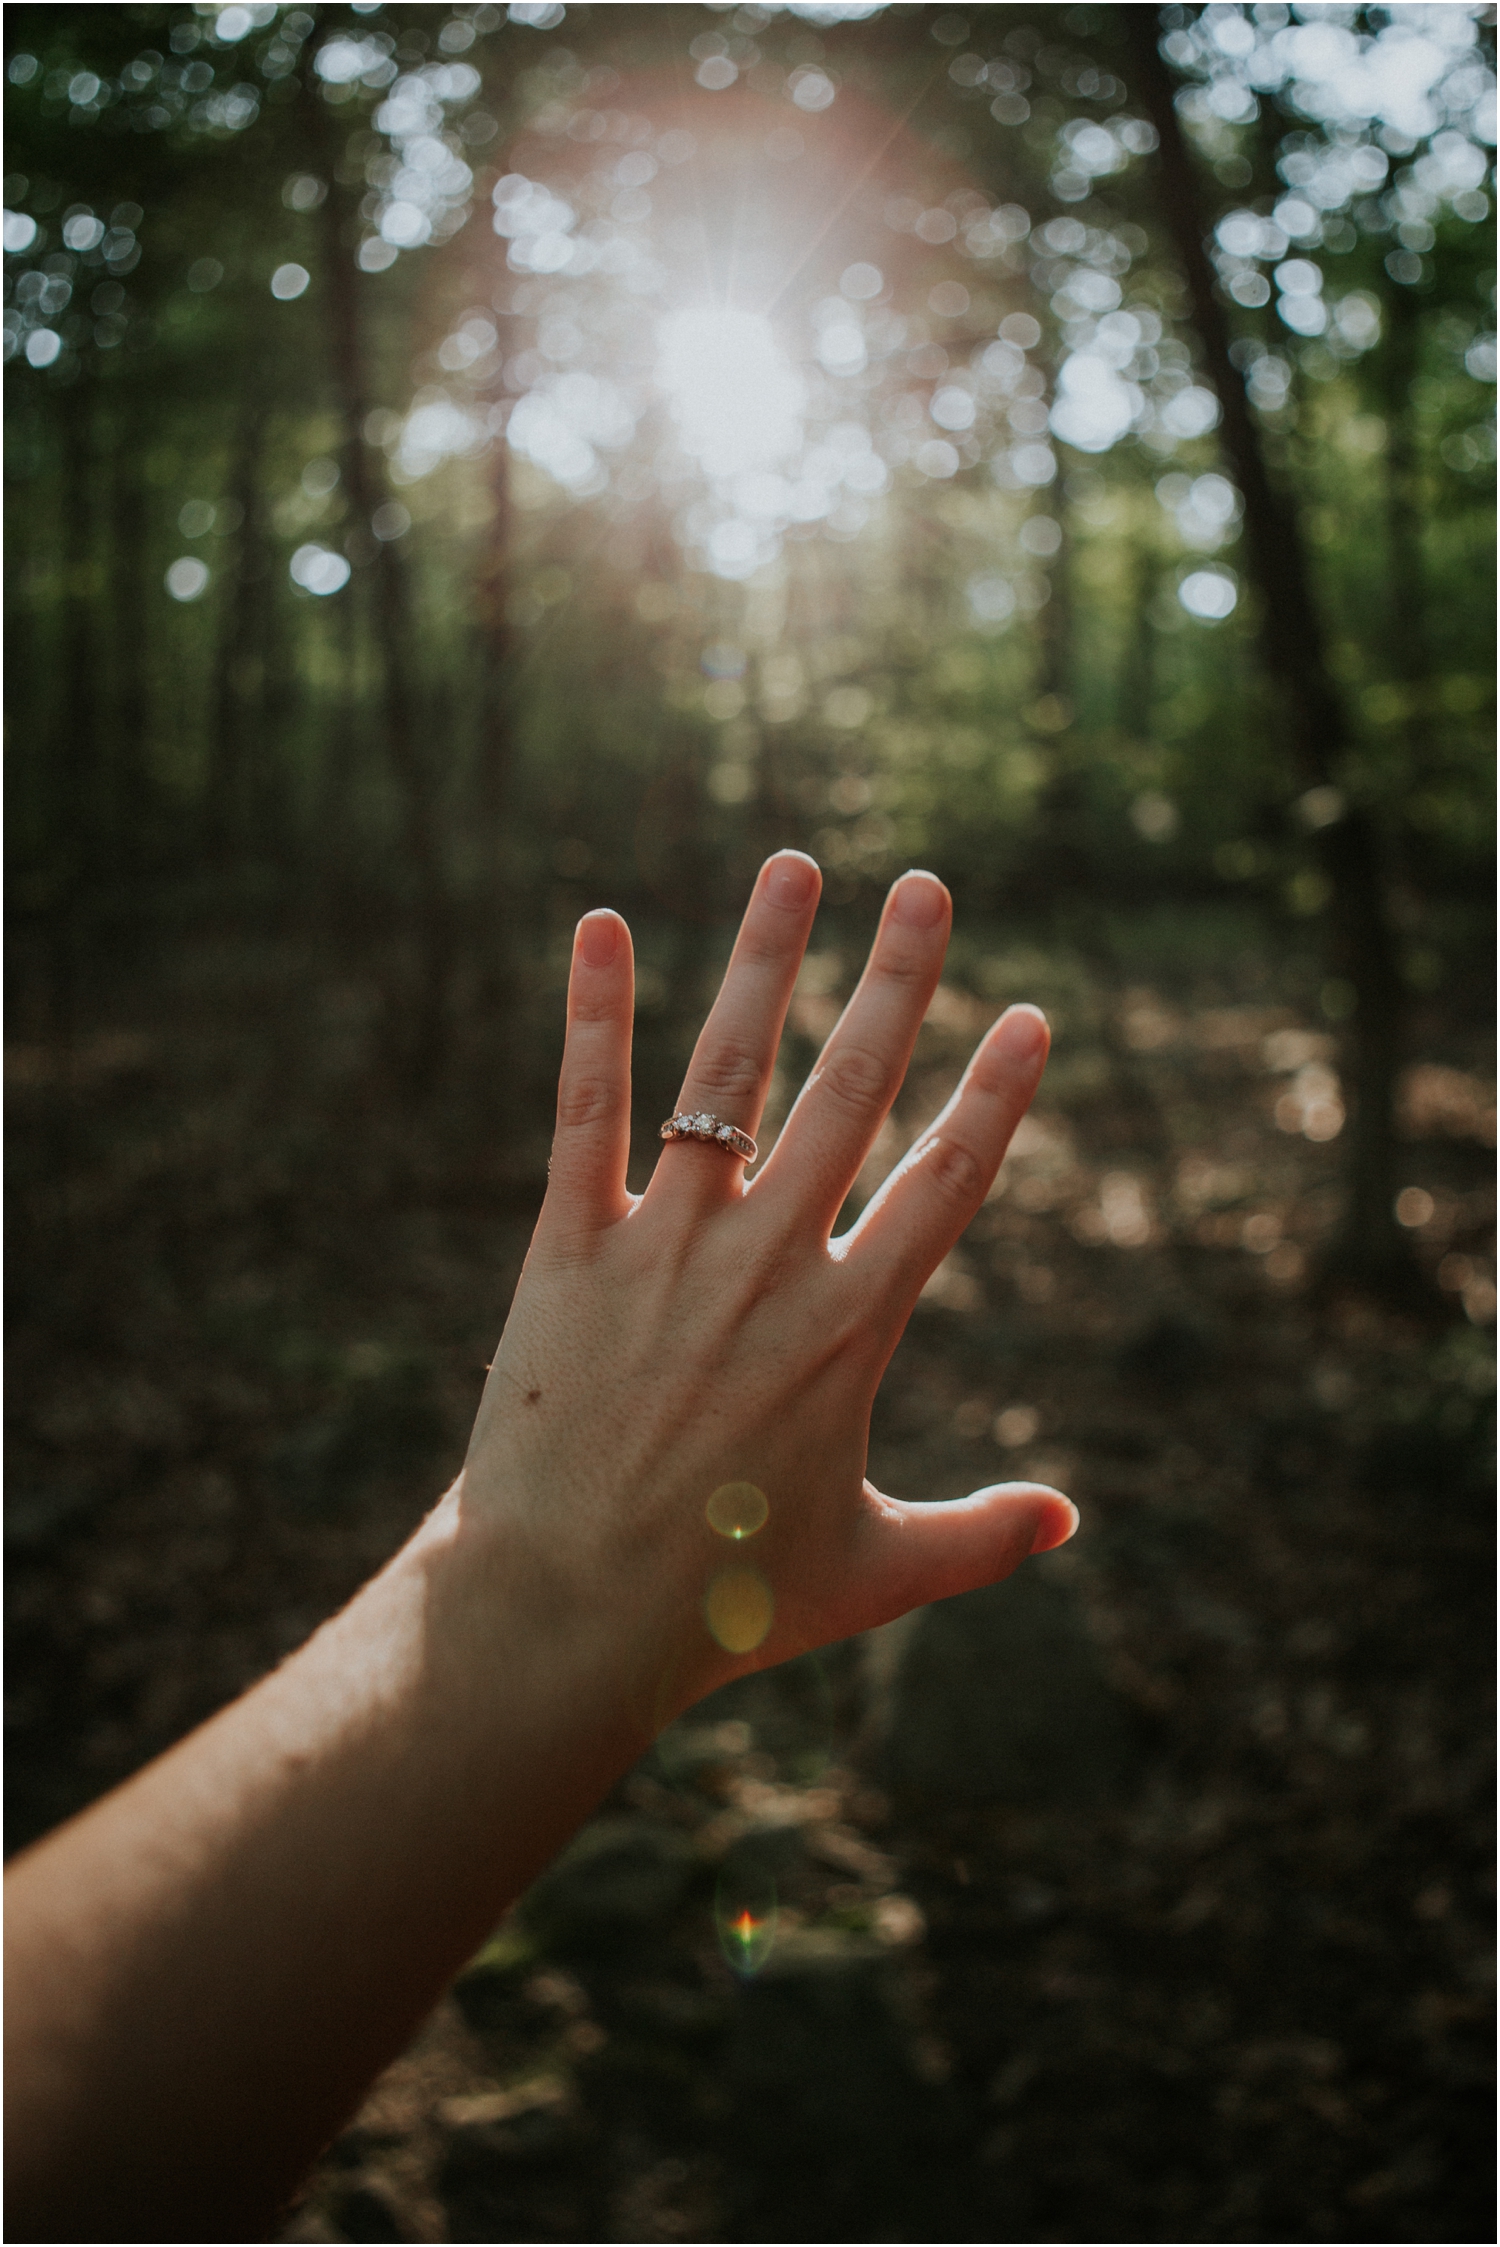 katy-sergent-photography-proposal-appalachian-trail-annapolis-rocks-adventurous-wedding-couples-intimate-elopement-hiking-backpacking-camping-photographer-johnson-city-tn-northeast-tennessee_0019.jpg